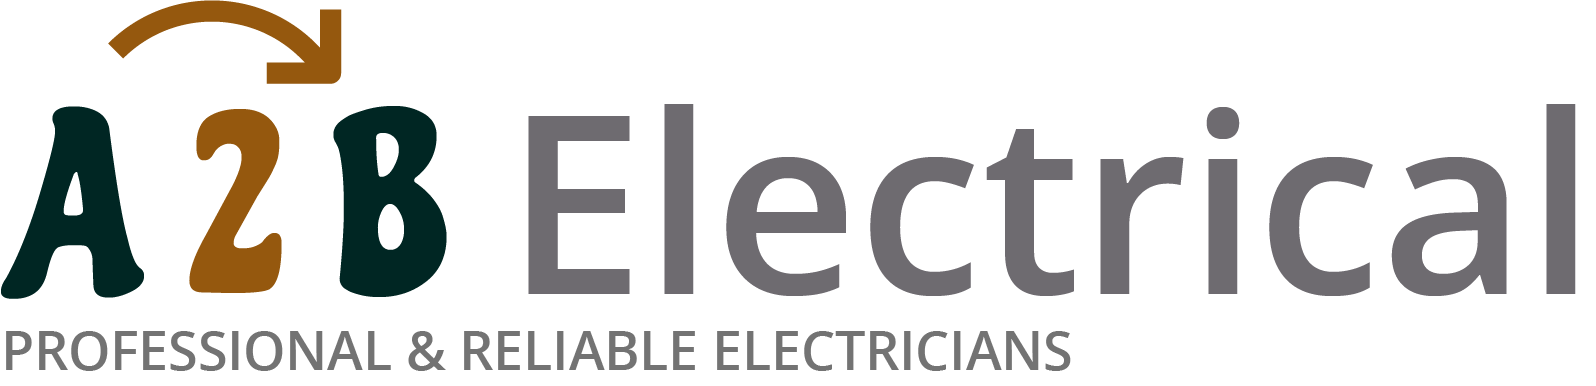 If you have electrical wiring problems in Redhill, we can provide an electrician to have a look for you. 